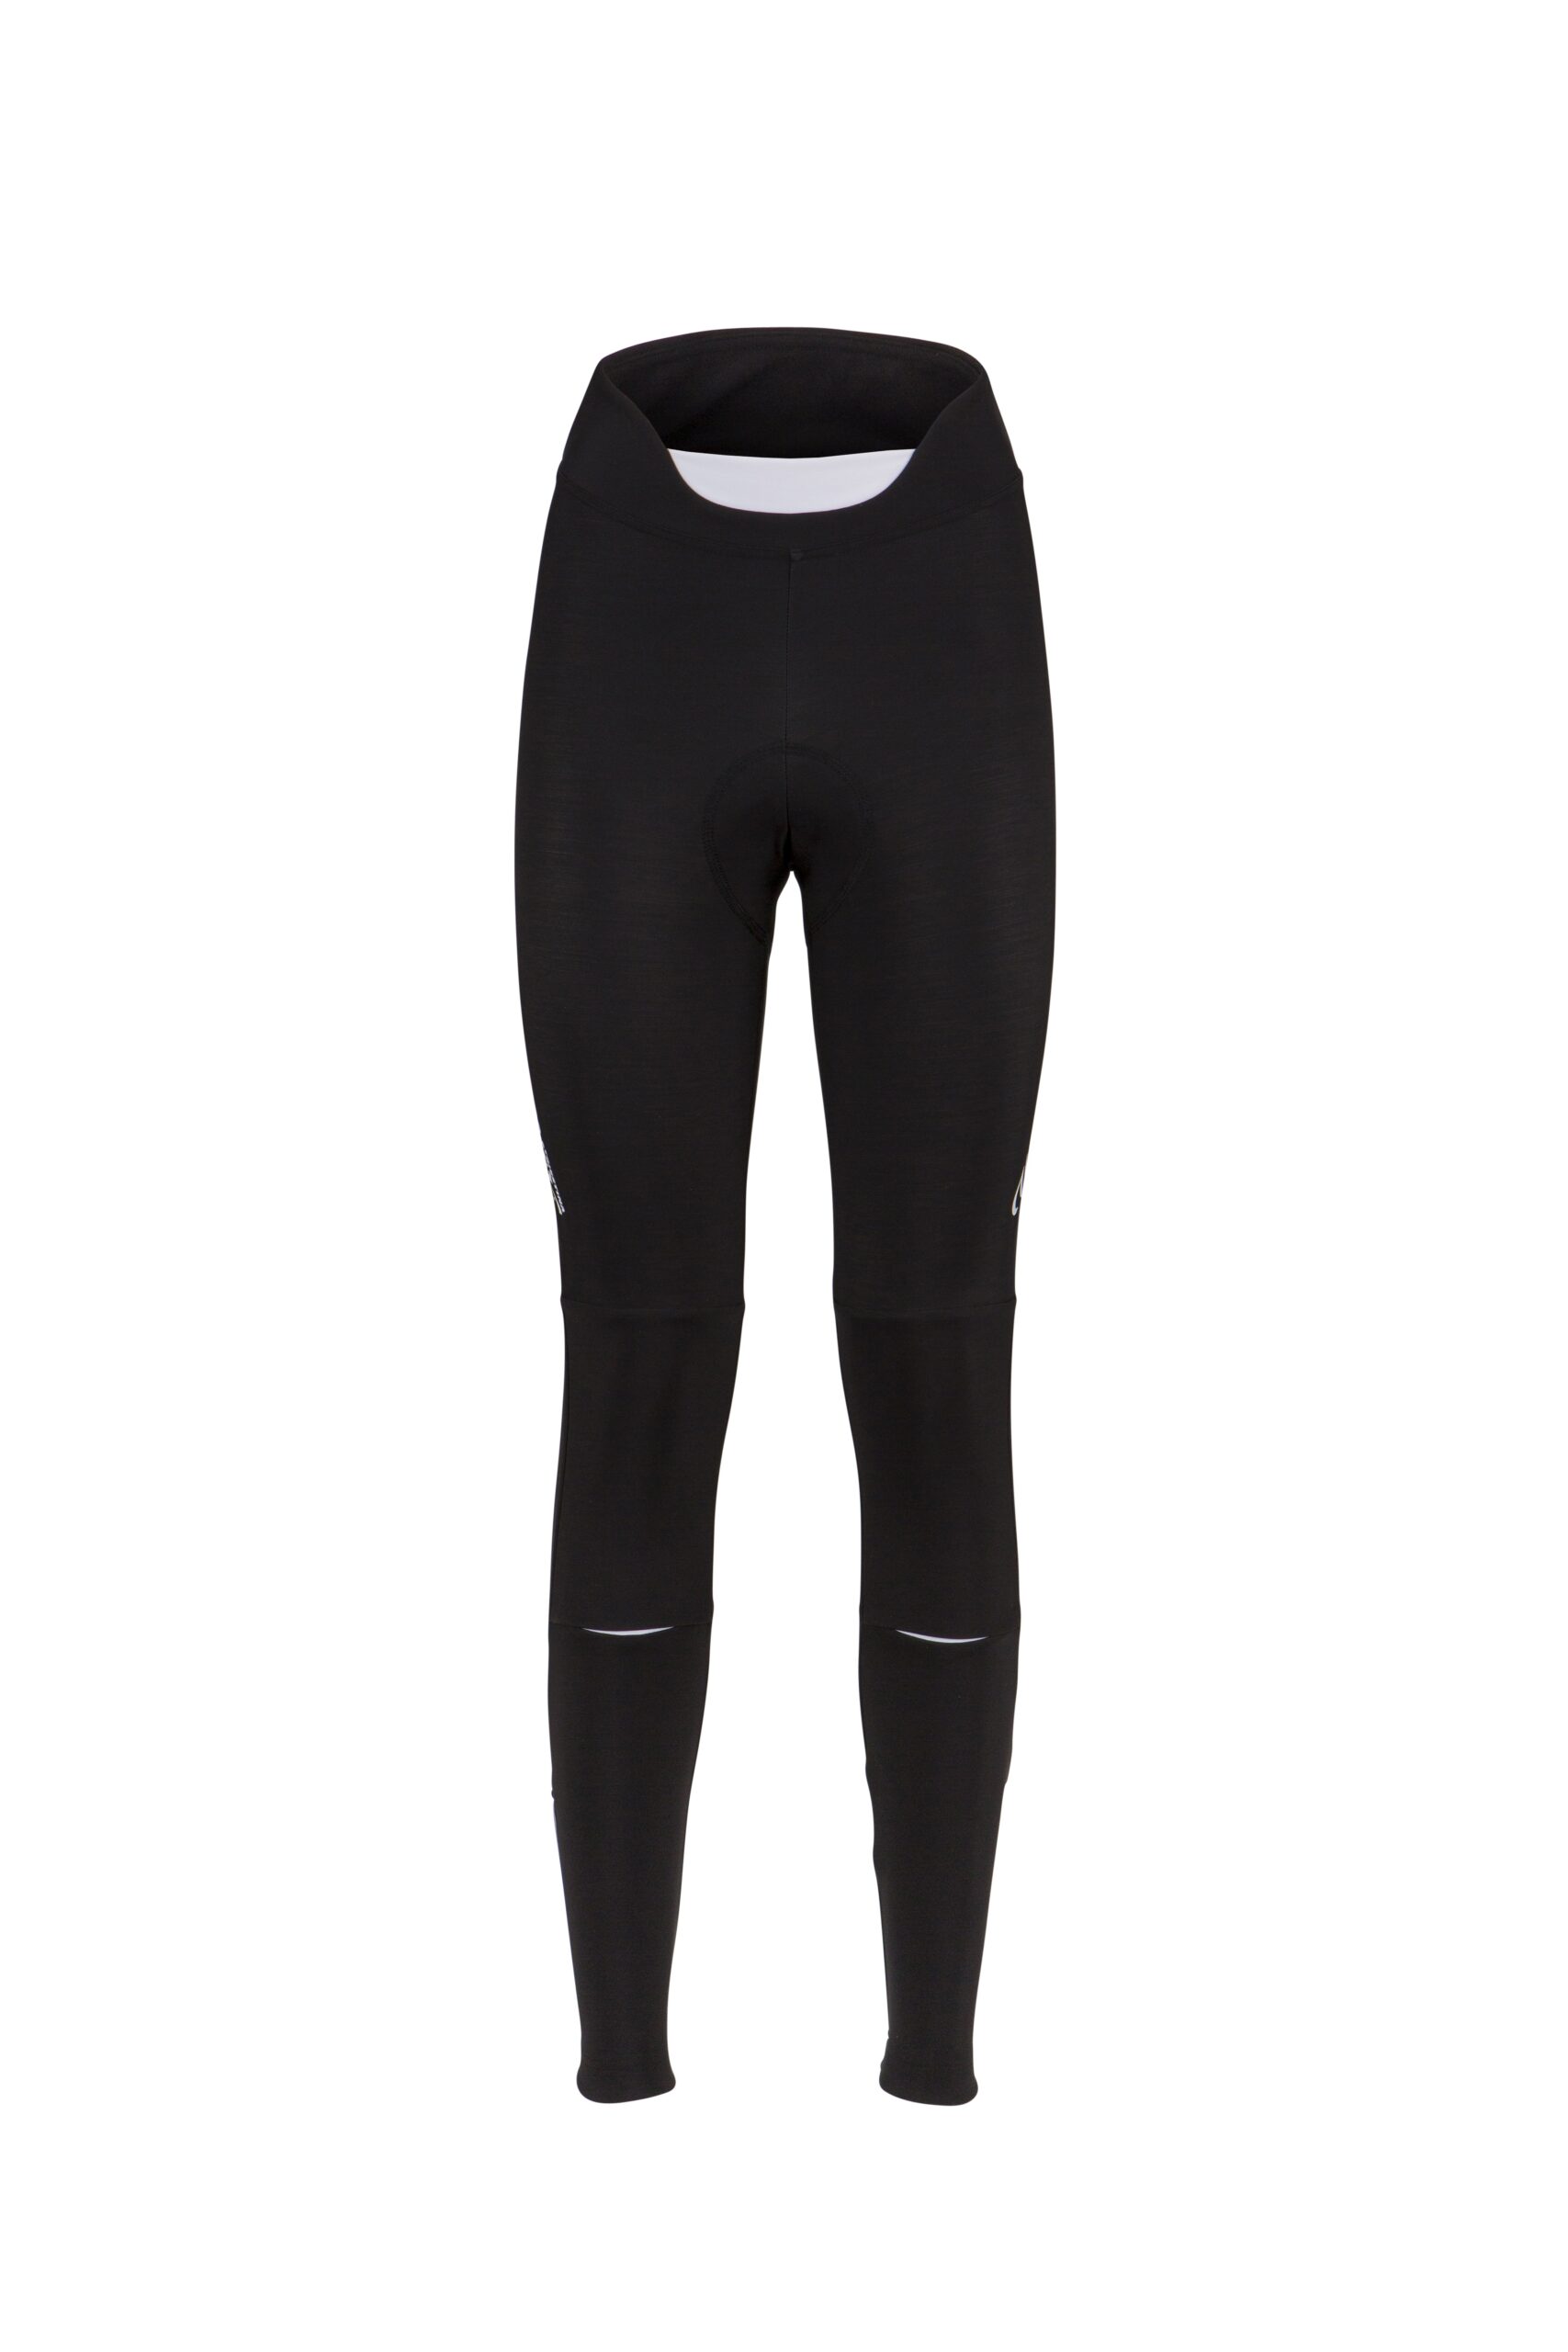 Wilier – Chic tight